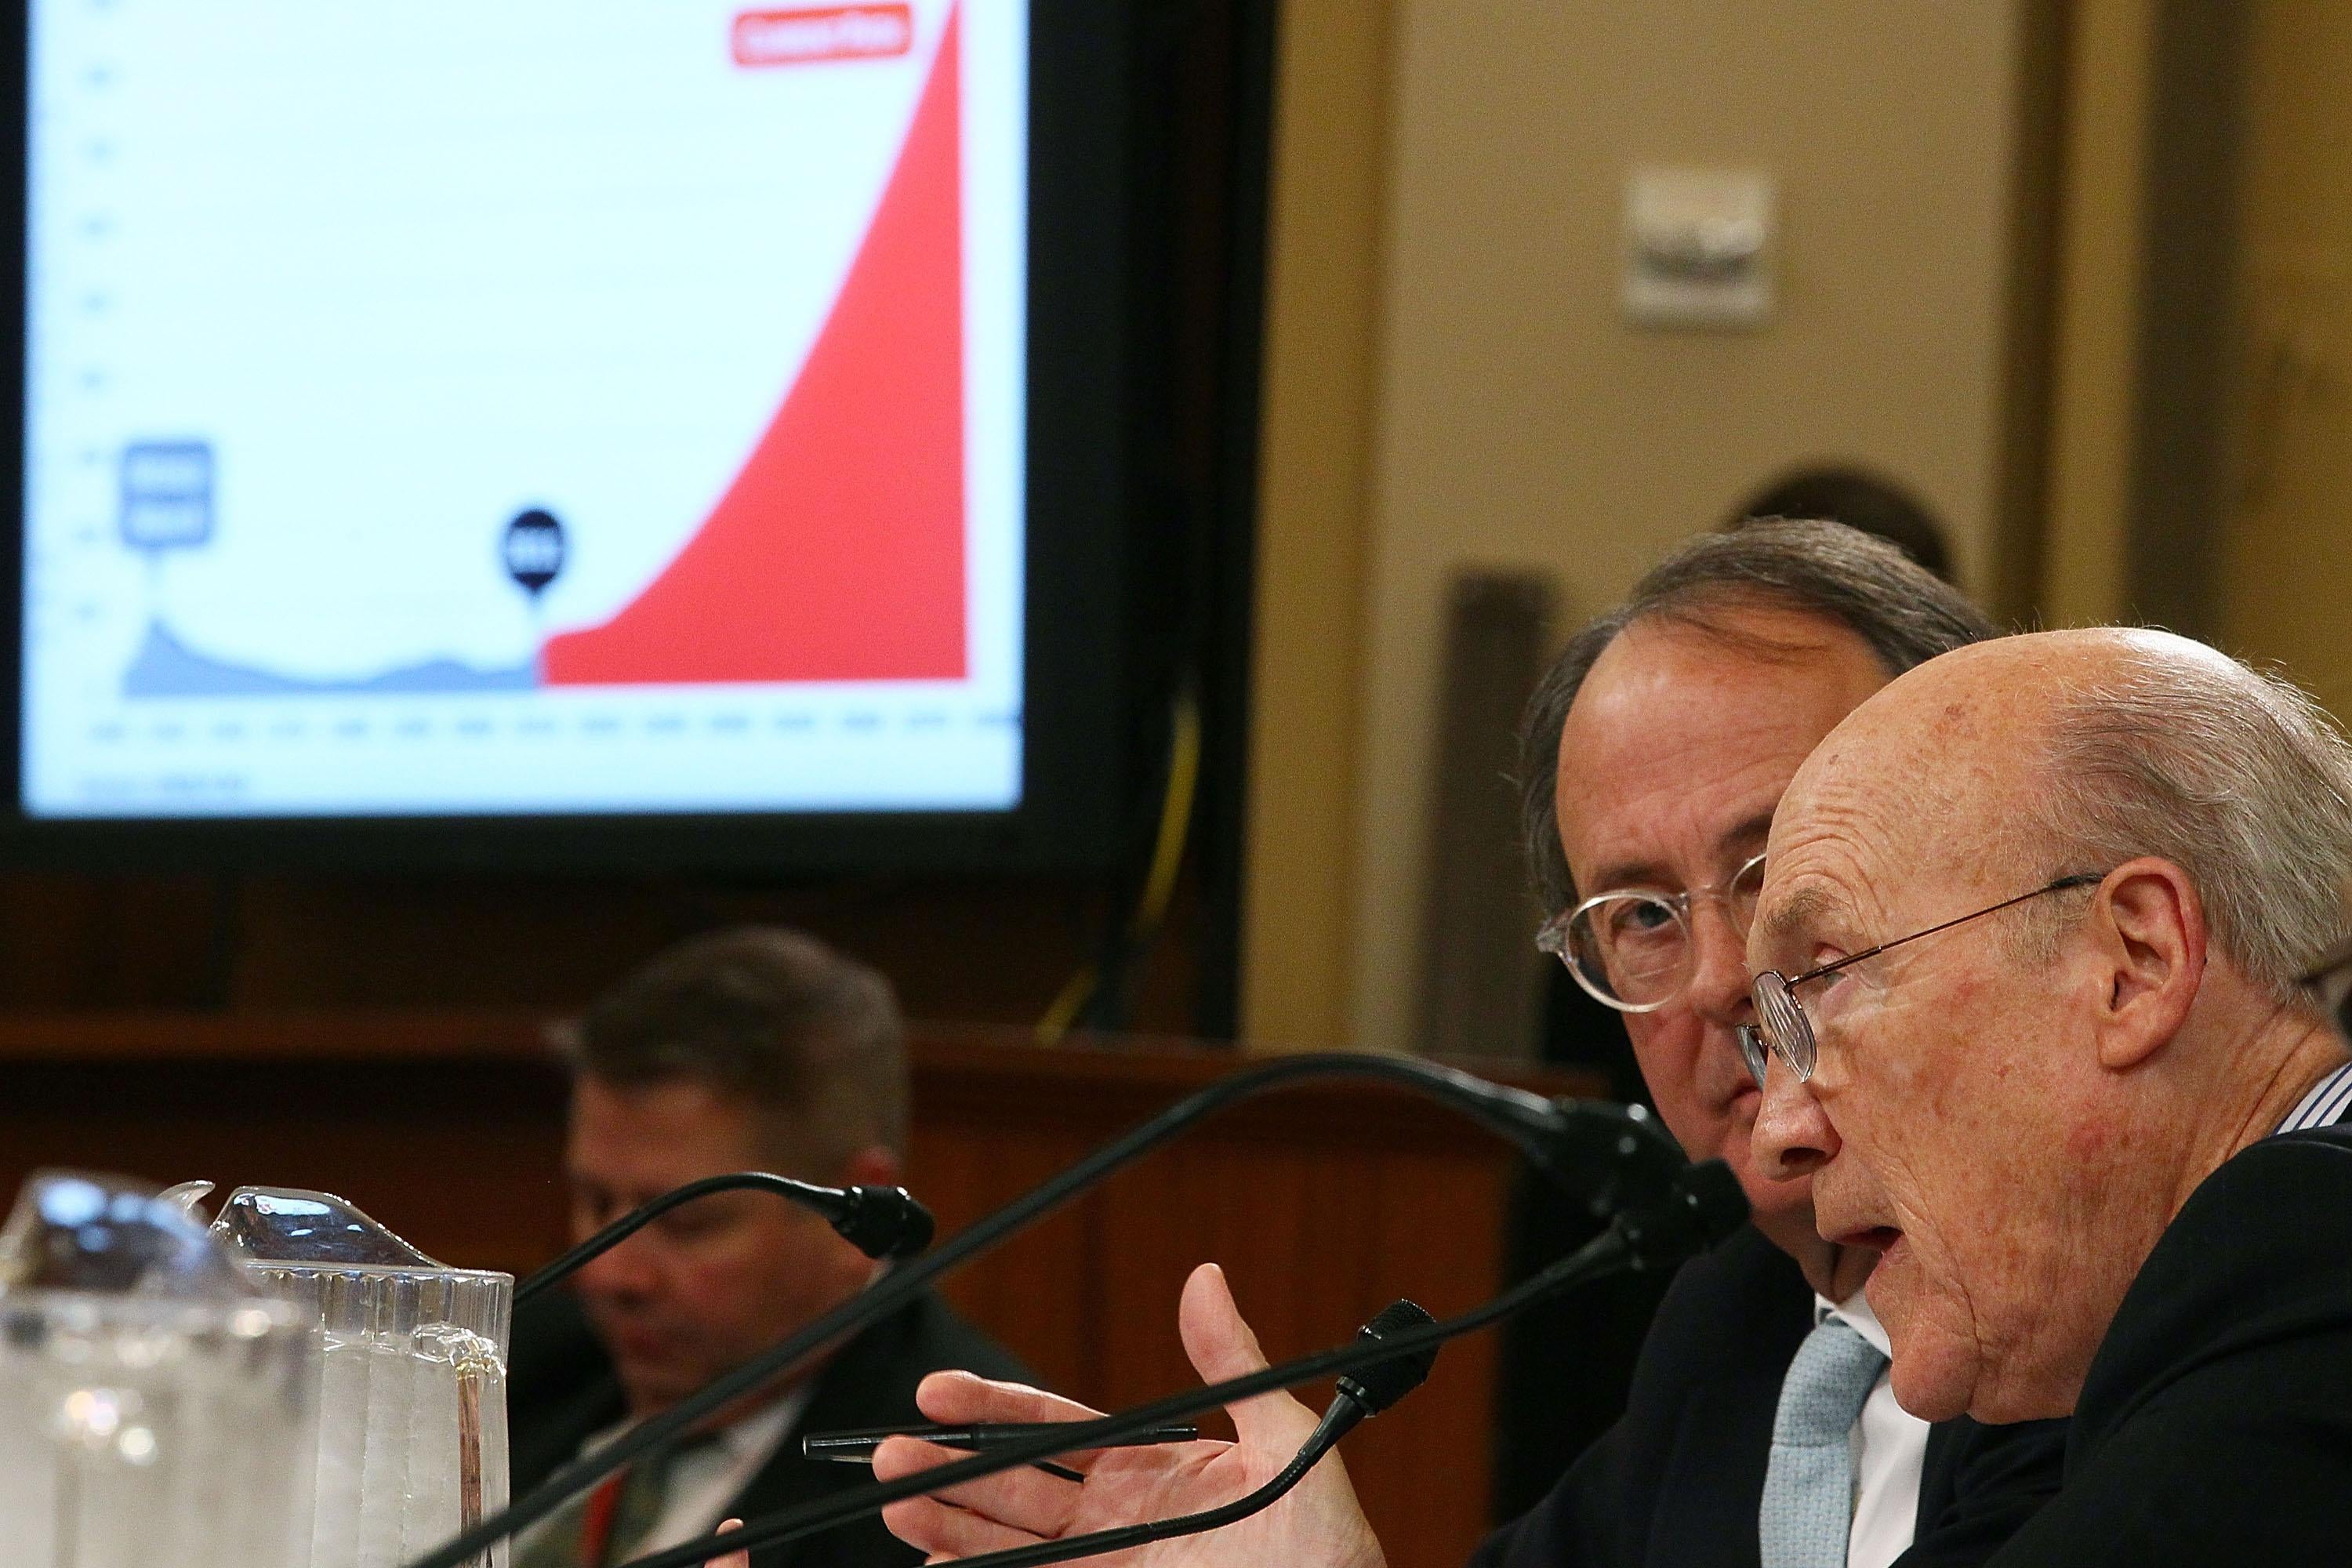 Simpson and Bowles are seated in a Joint Deficit Reduction Committee hearing on Capitol Hill on Nov. 1, 2011. A chart is projected on the screen nearby.